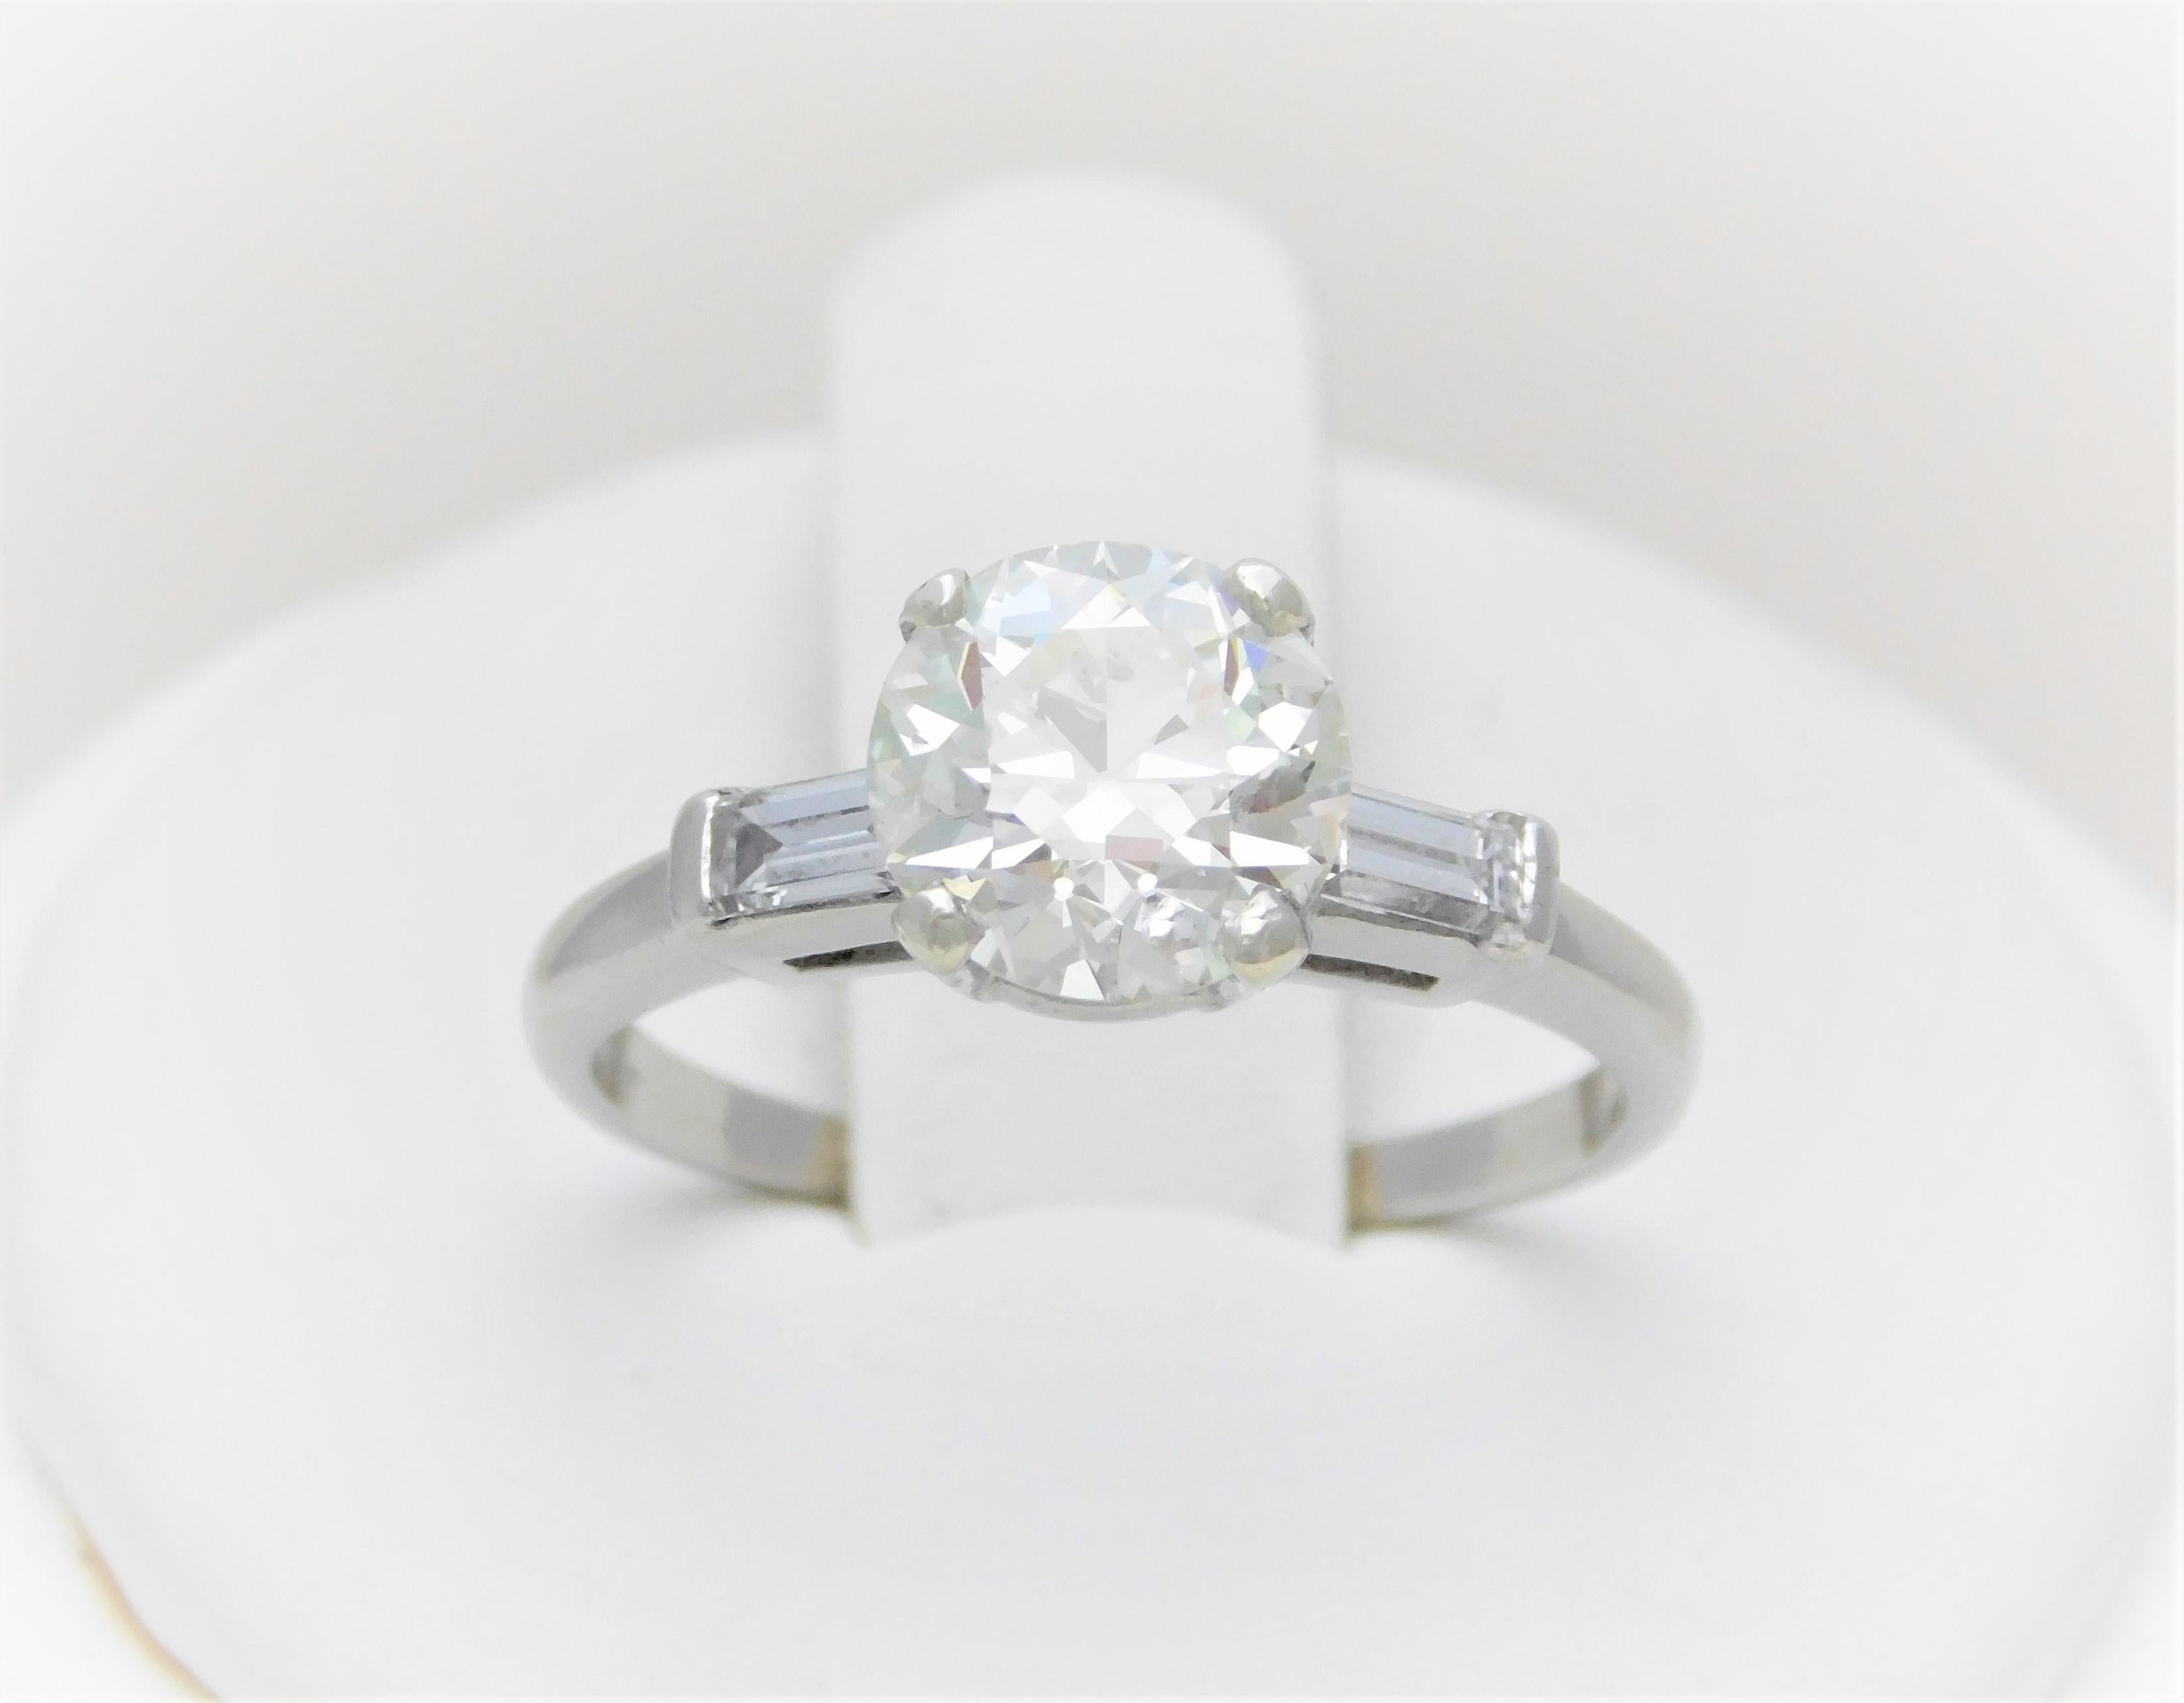 Antique 2.02 Total Carat Weight Old European Cut Diamond Engagement Ring  

From an old New Orleans estate.  This solitaire style engagement ring has been crafted in solid 990 Platinum.  It has been expertly set with a 100+ year old GIA Certified